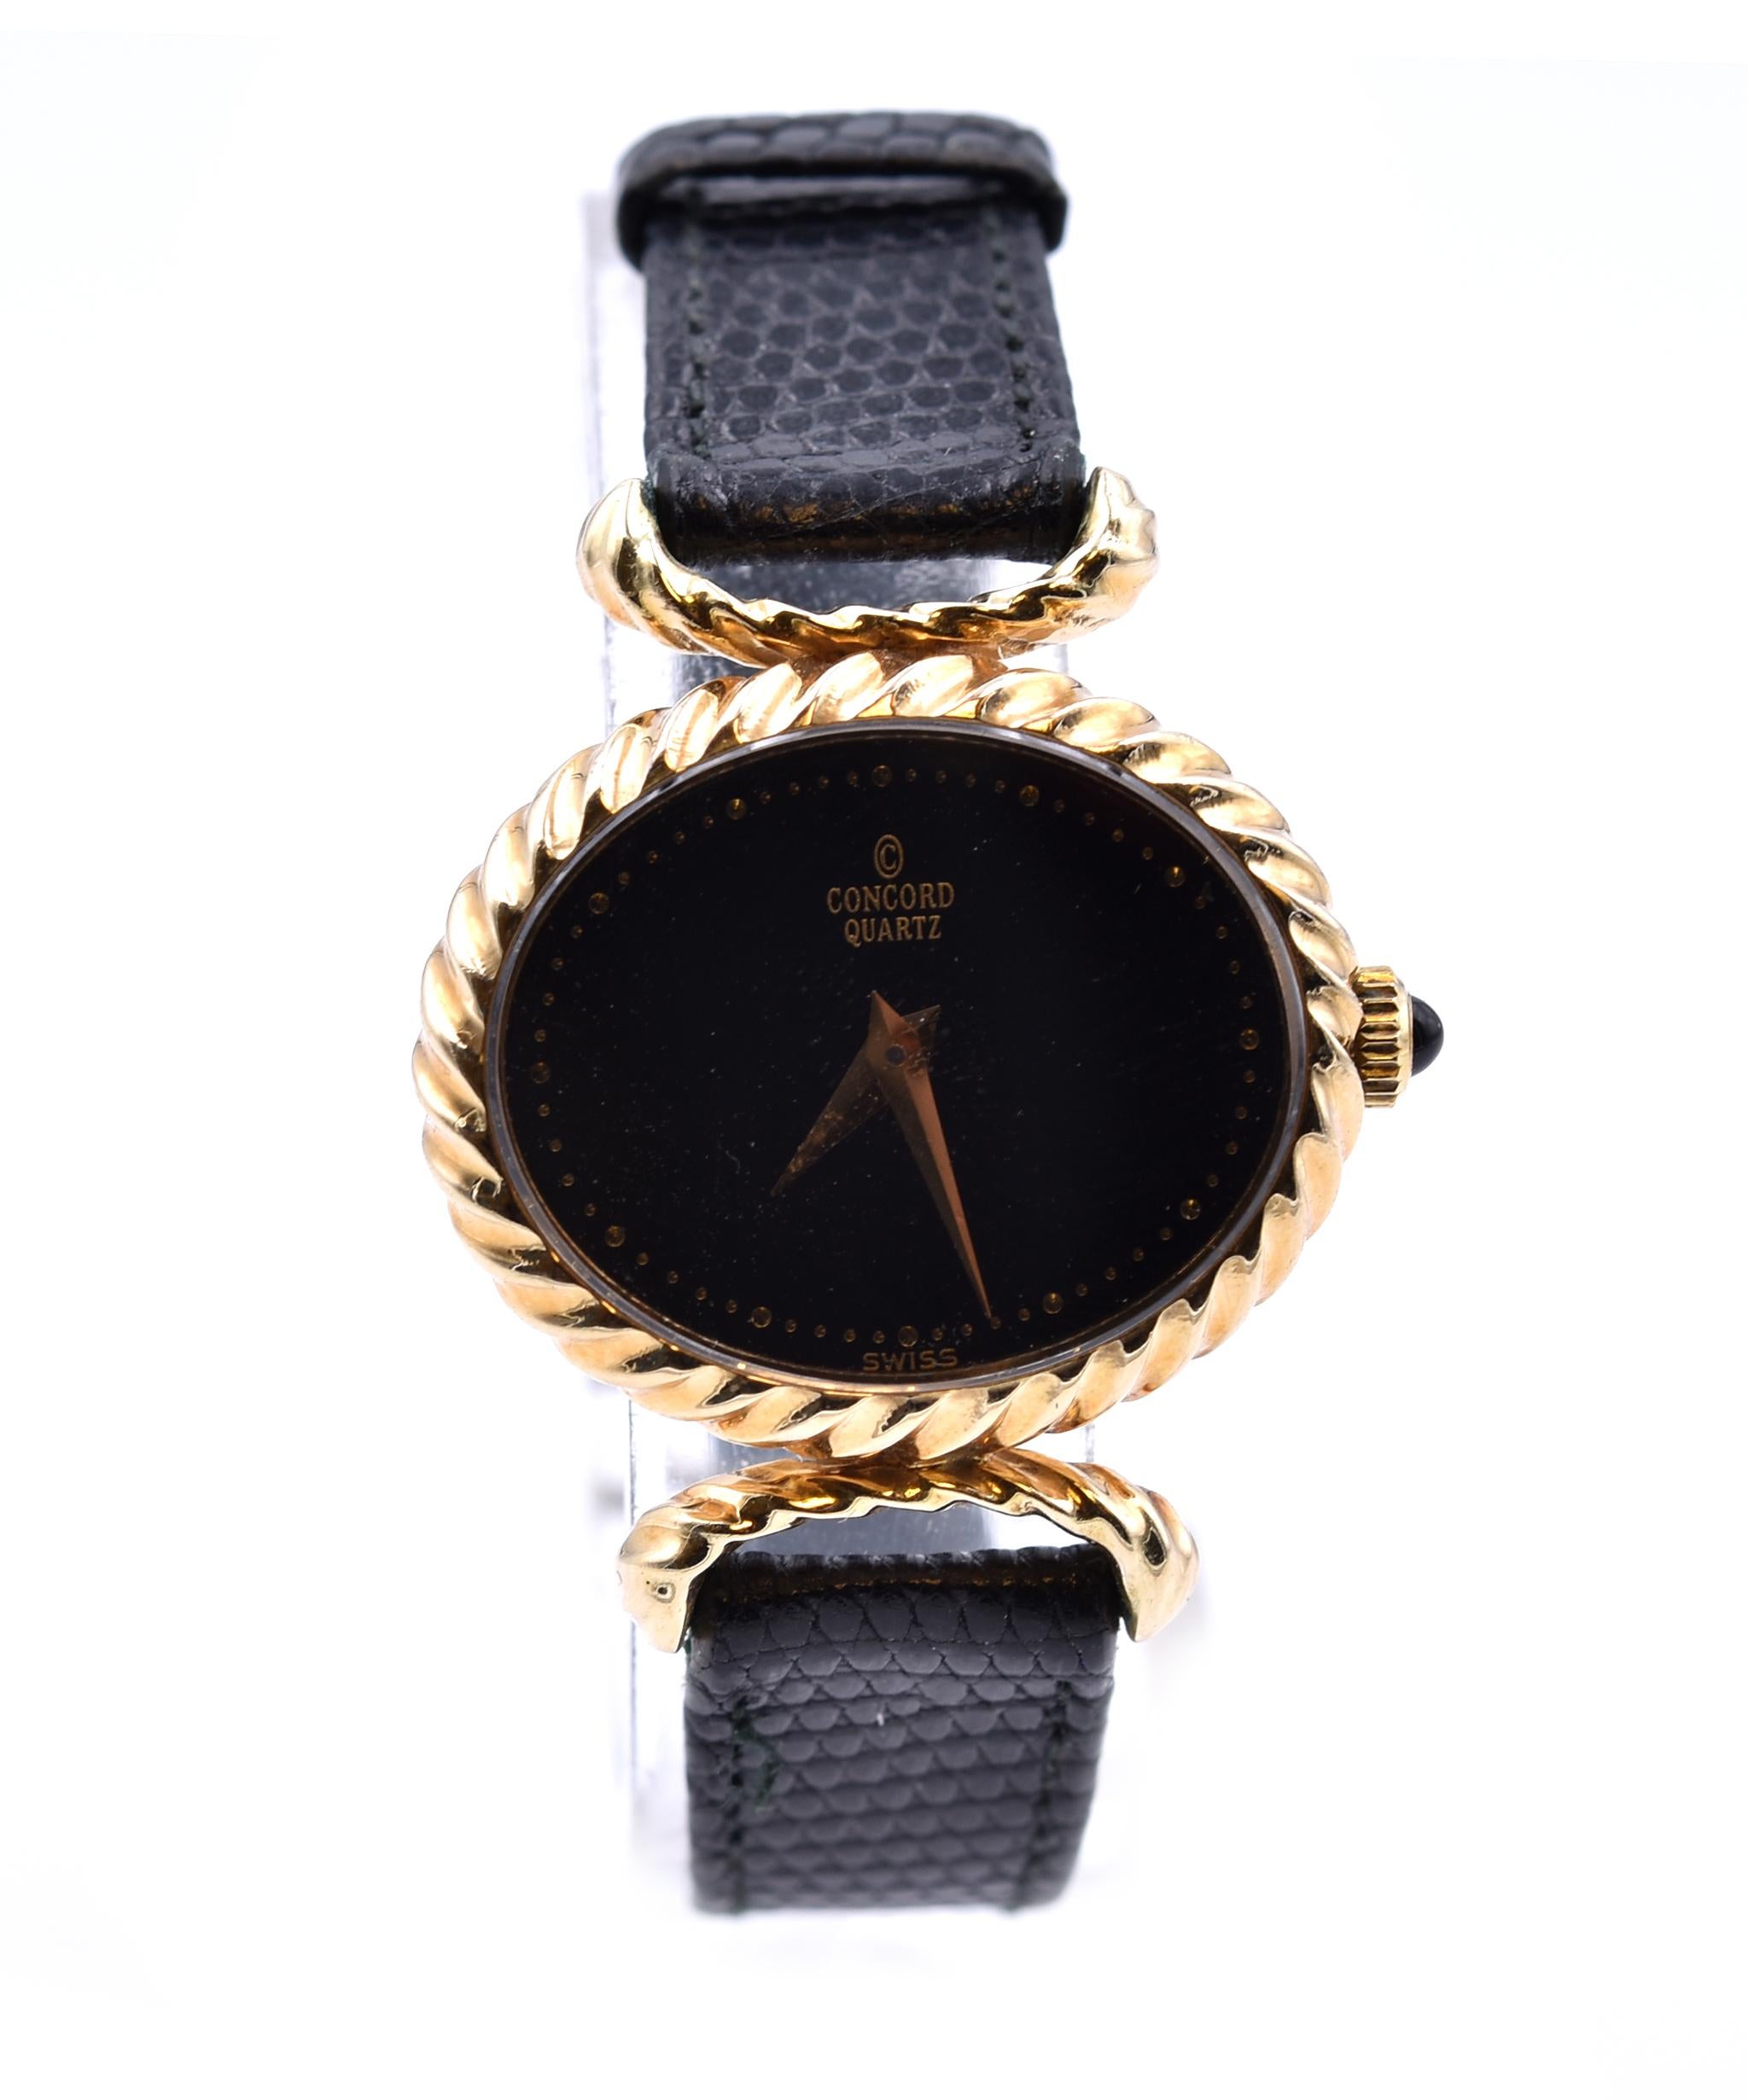 Movement: quartz, 6 jewels
Function: hours, minutes
Case: 25.82mm x 21.80mm oval 14k yellow gold case, sapphire crystal, pull/push crown
Dial: black dial with gold hands, gold dot hour and minute markers
Band: brown alligator band with tang buckle,